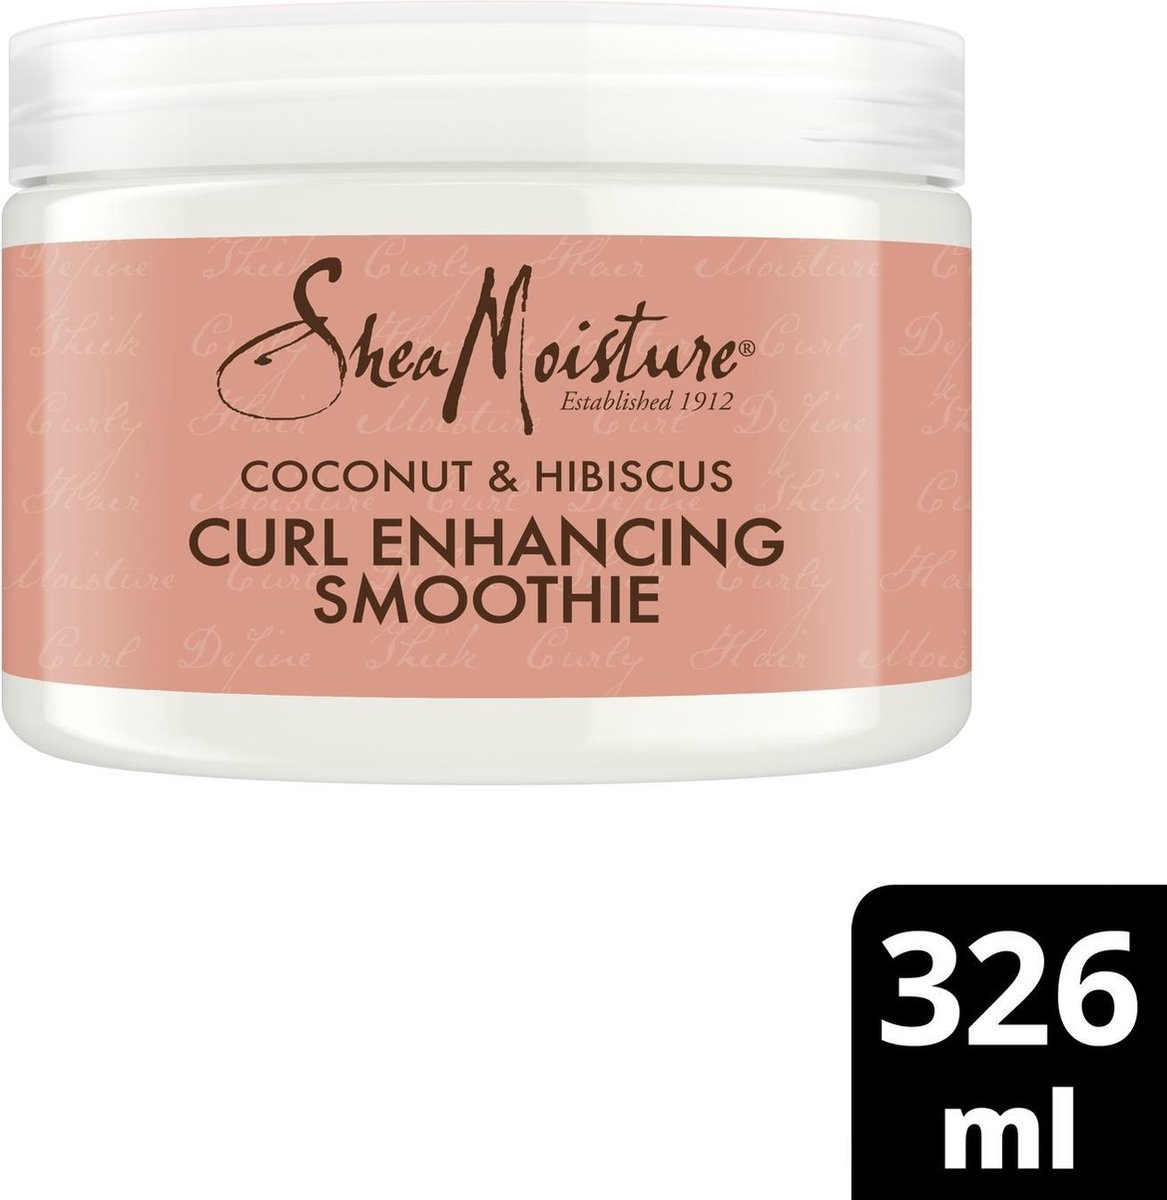 SheaMoisture Coconut & Hibiscus Curl Enhancing Smoothie - 326 ml